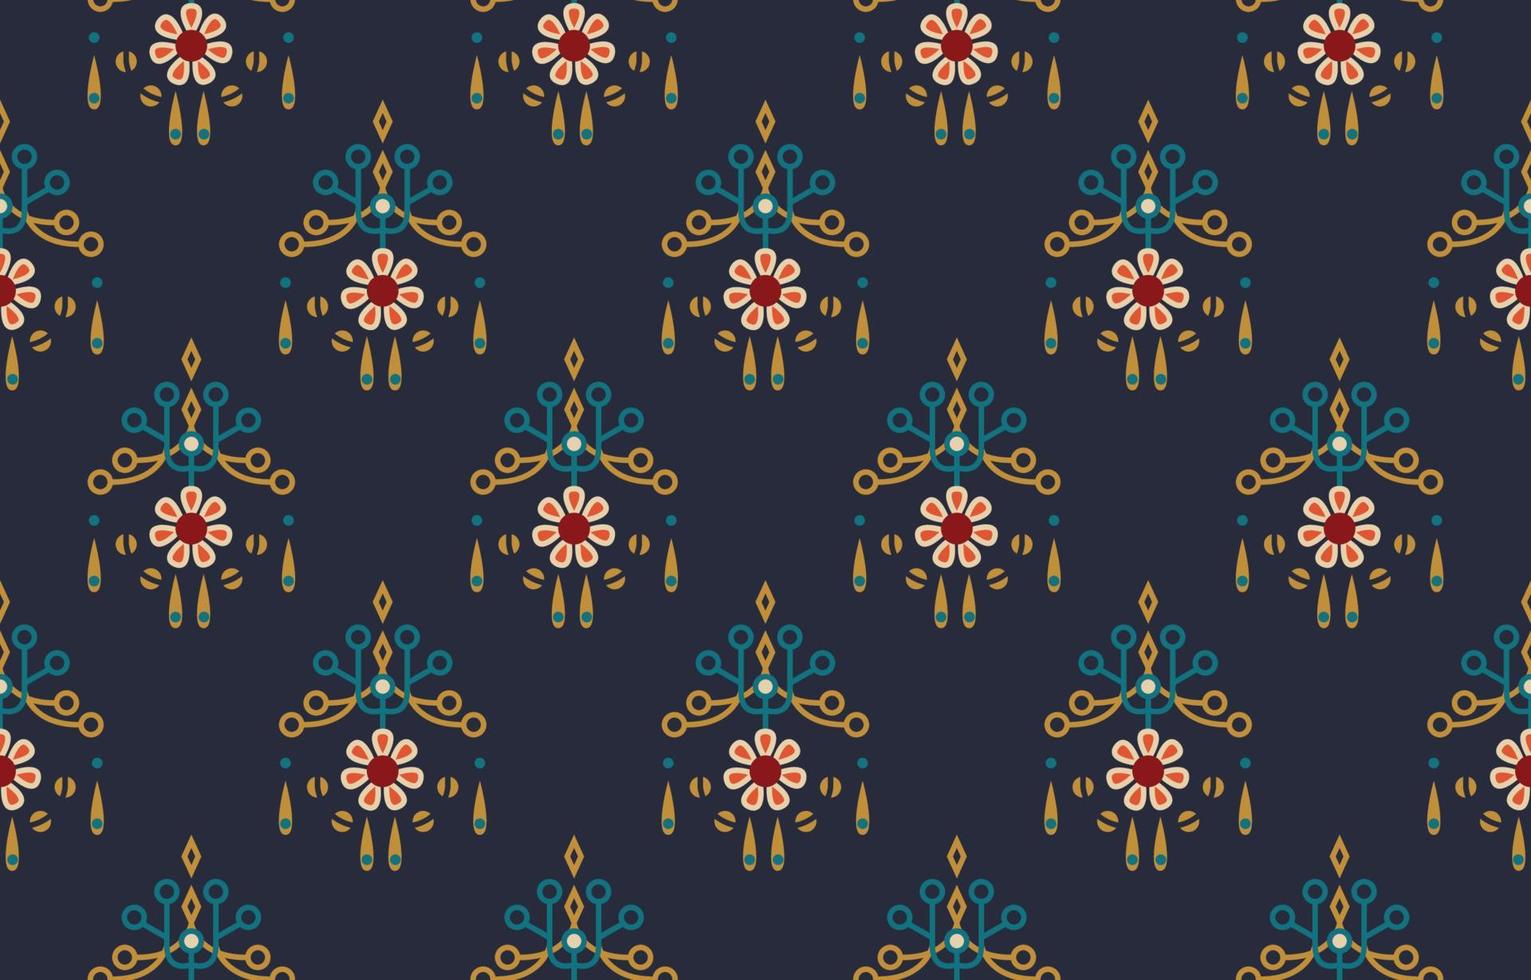 Ethnic abstract flower pattern art. Seamless pattern in tribal, folk embroidery, and Mexican style. Aztec geometric art ornament print.Design for carpet,  clothing, wrapping, fabric, cover, textile vector